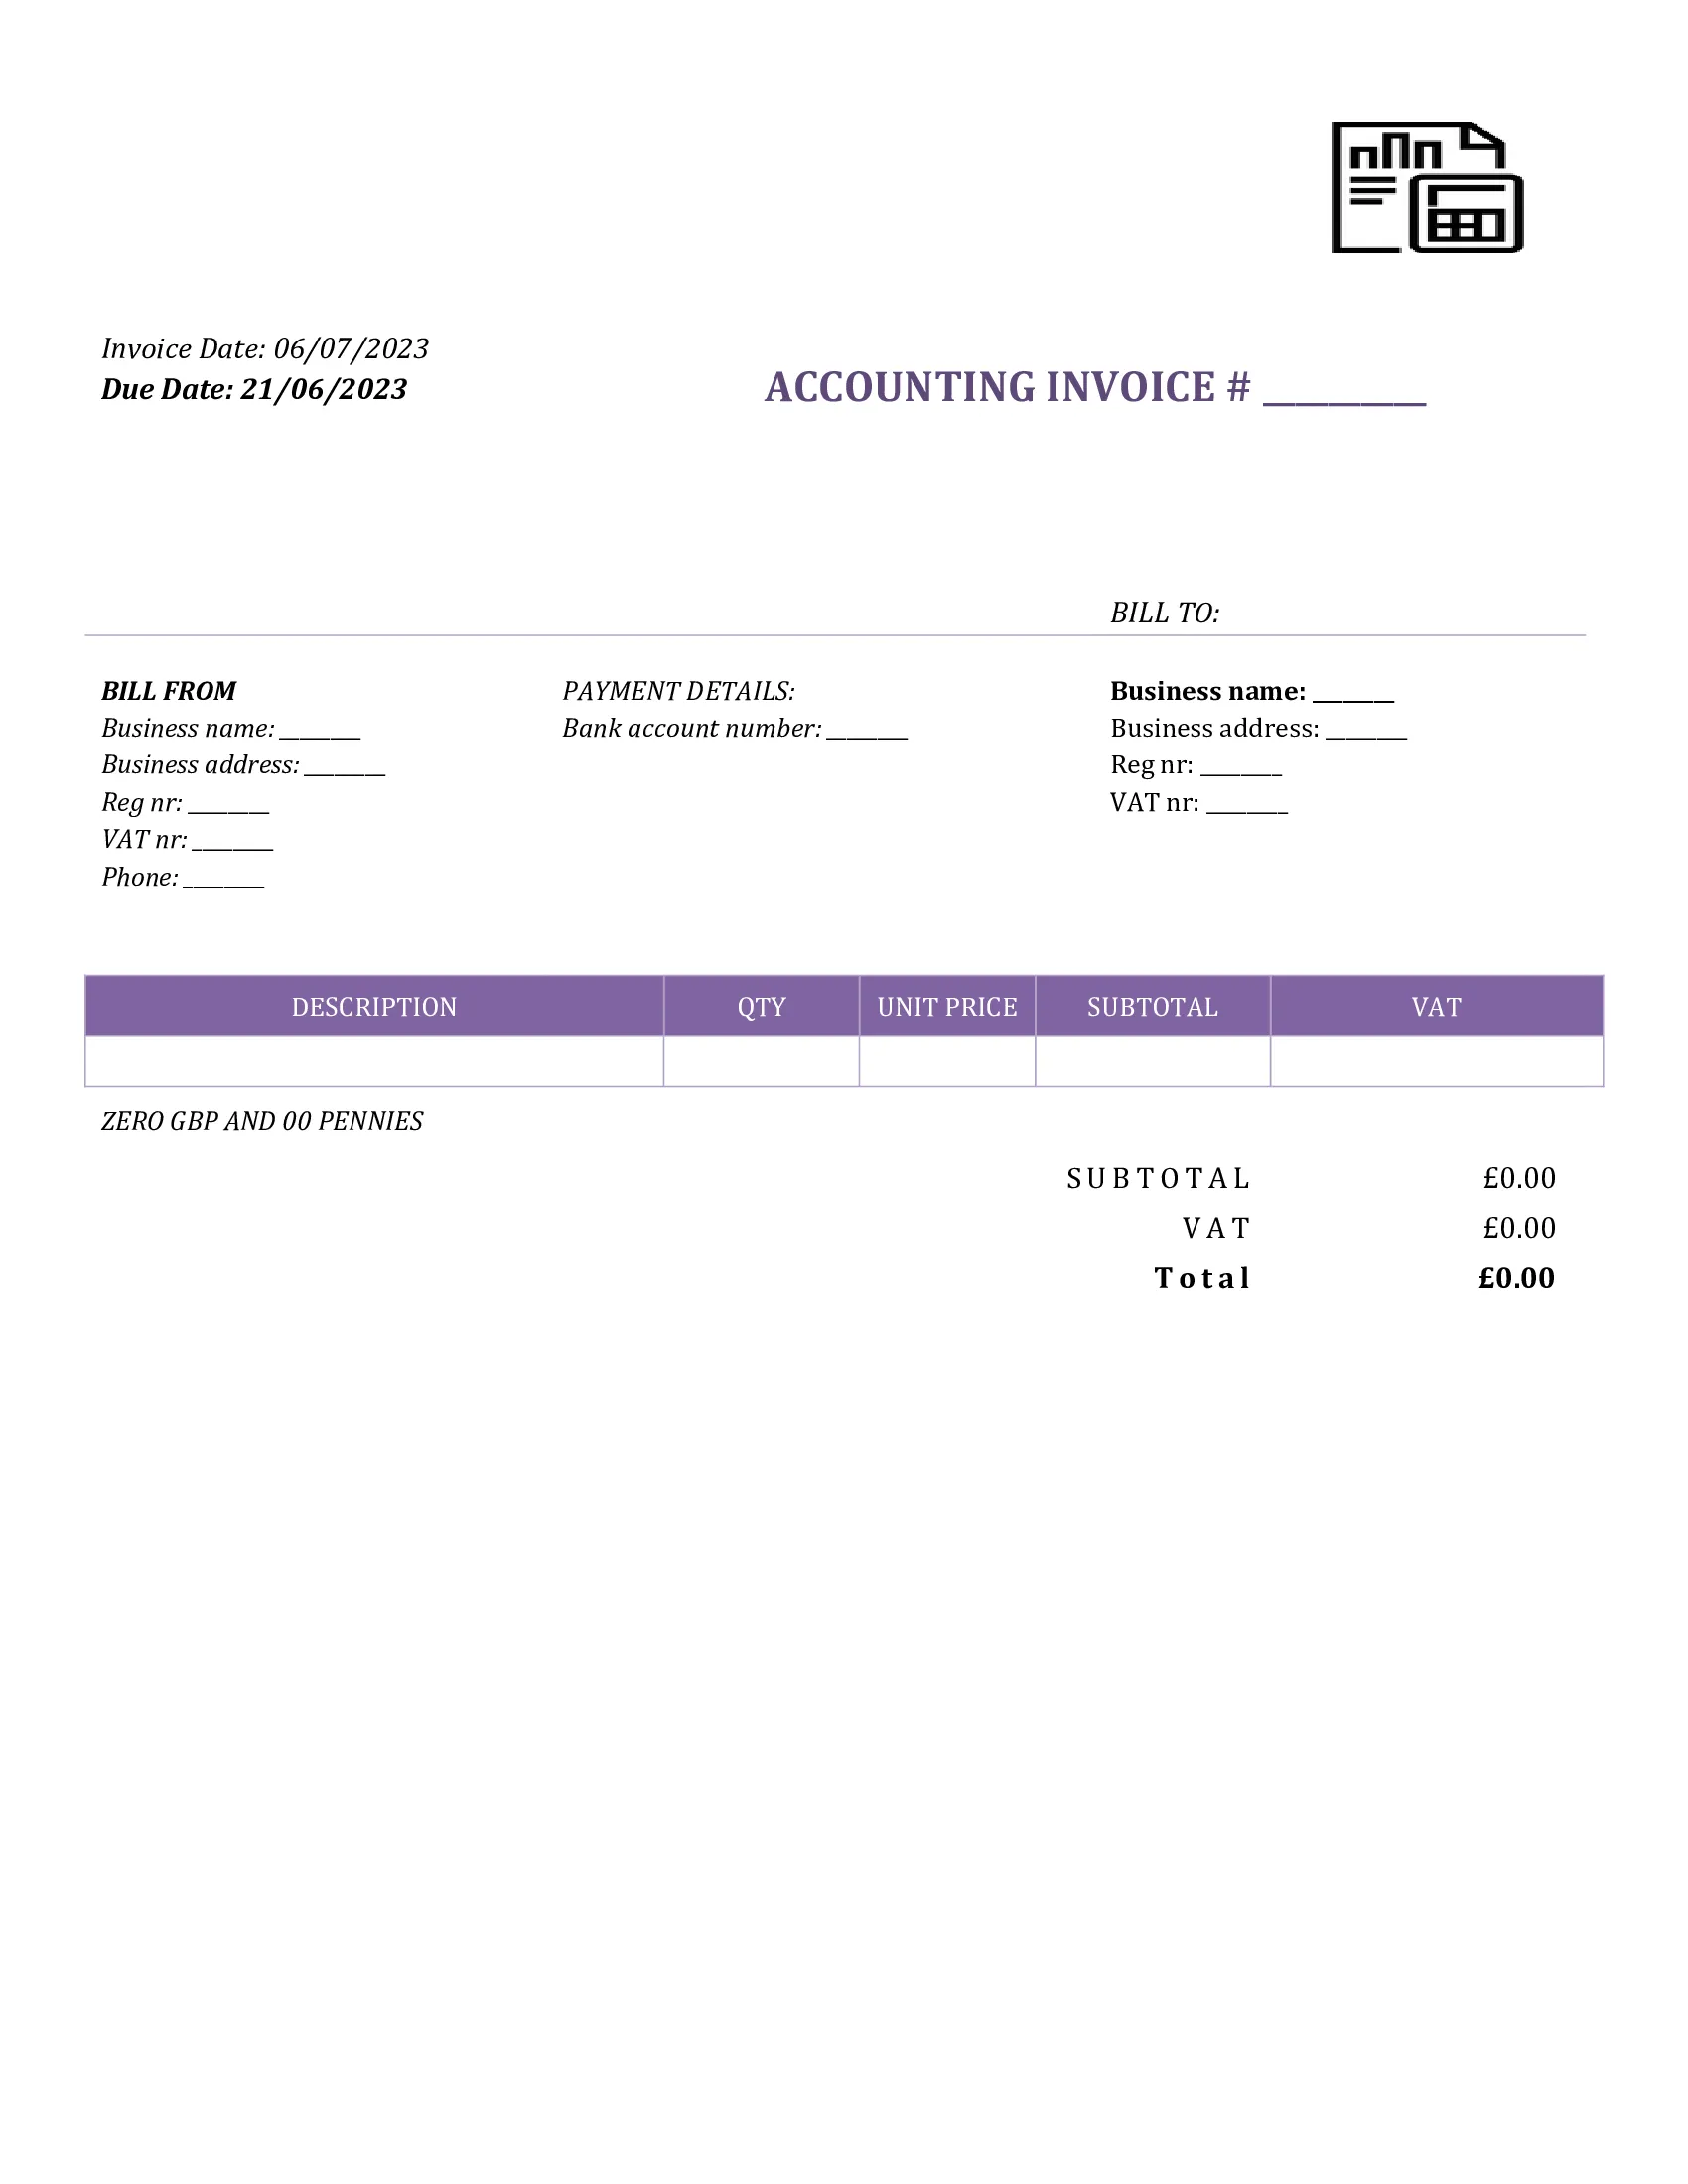 fillable accounting invoice template UK Word / Google docs